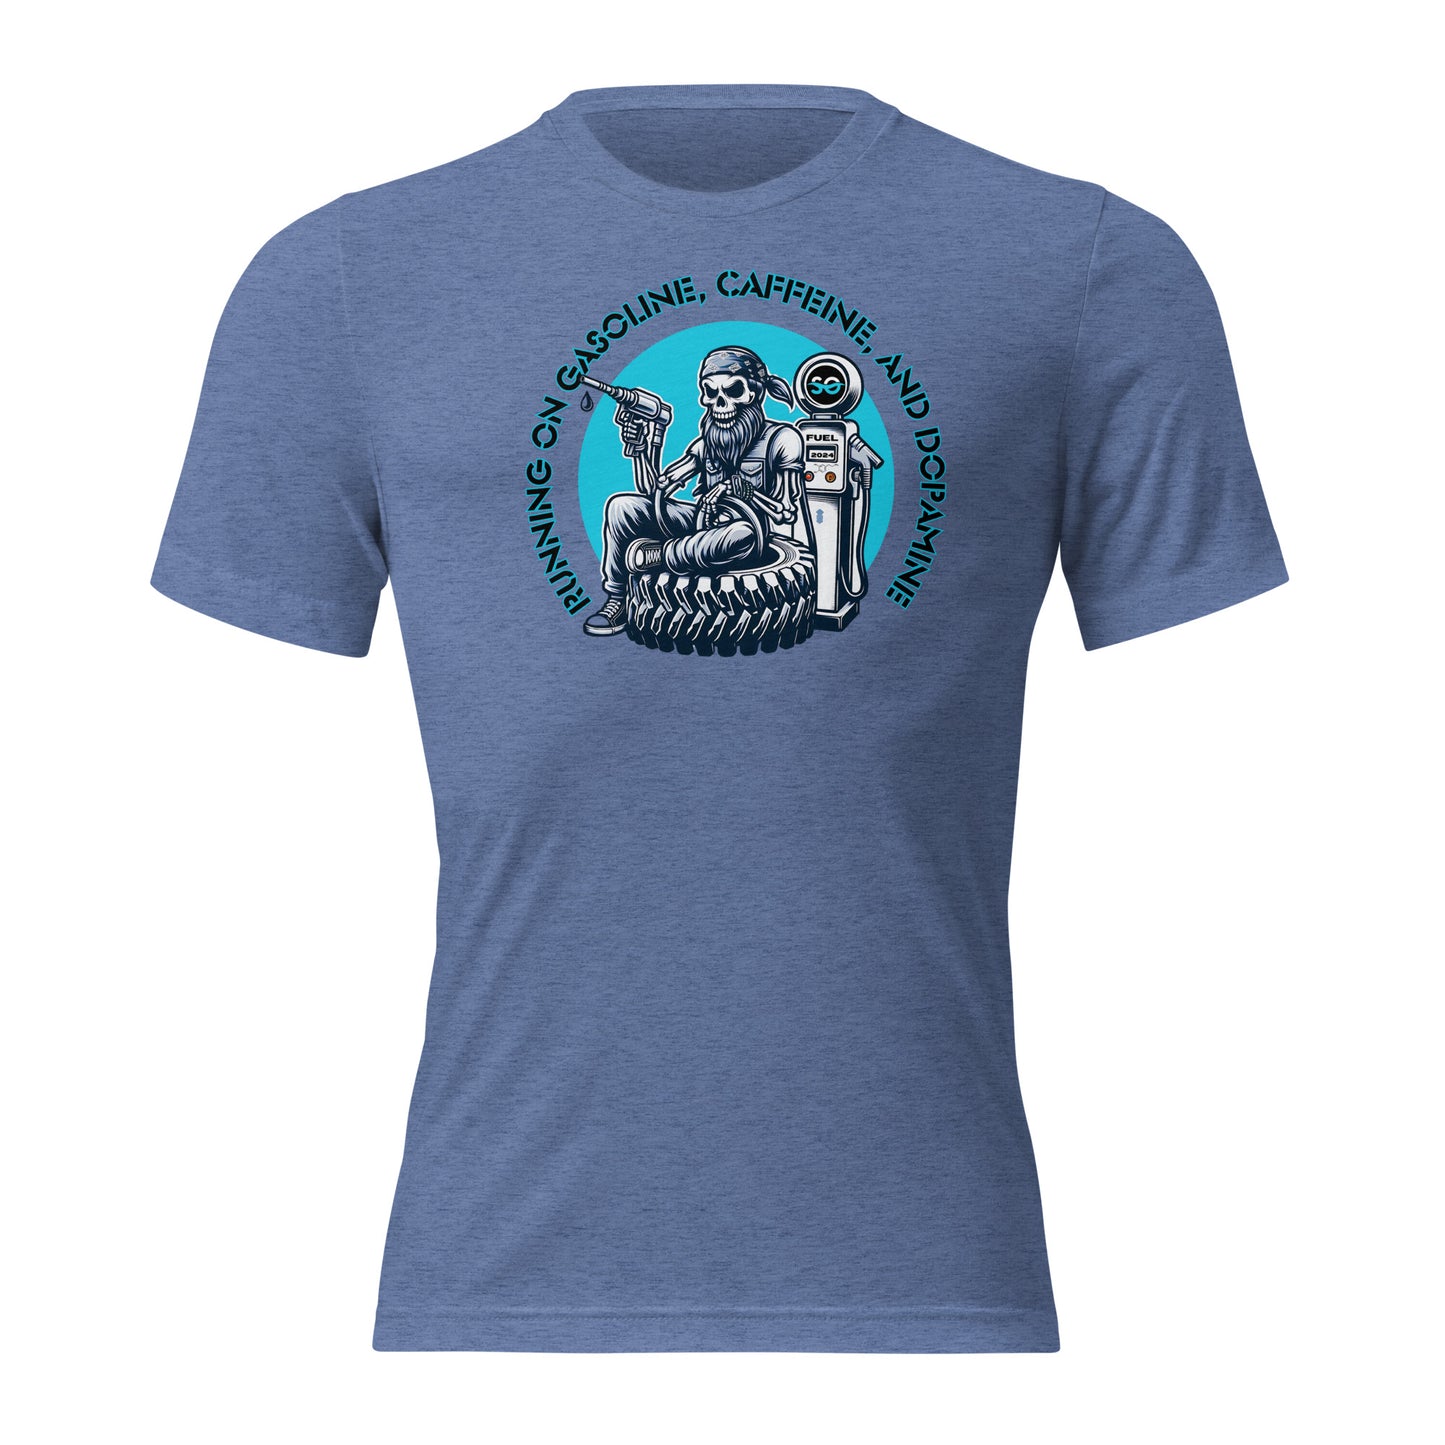 a blue t - shirt with a picture of a man on a motorcycle